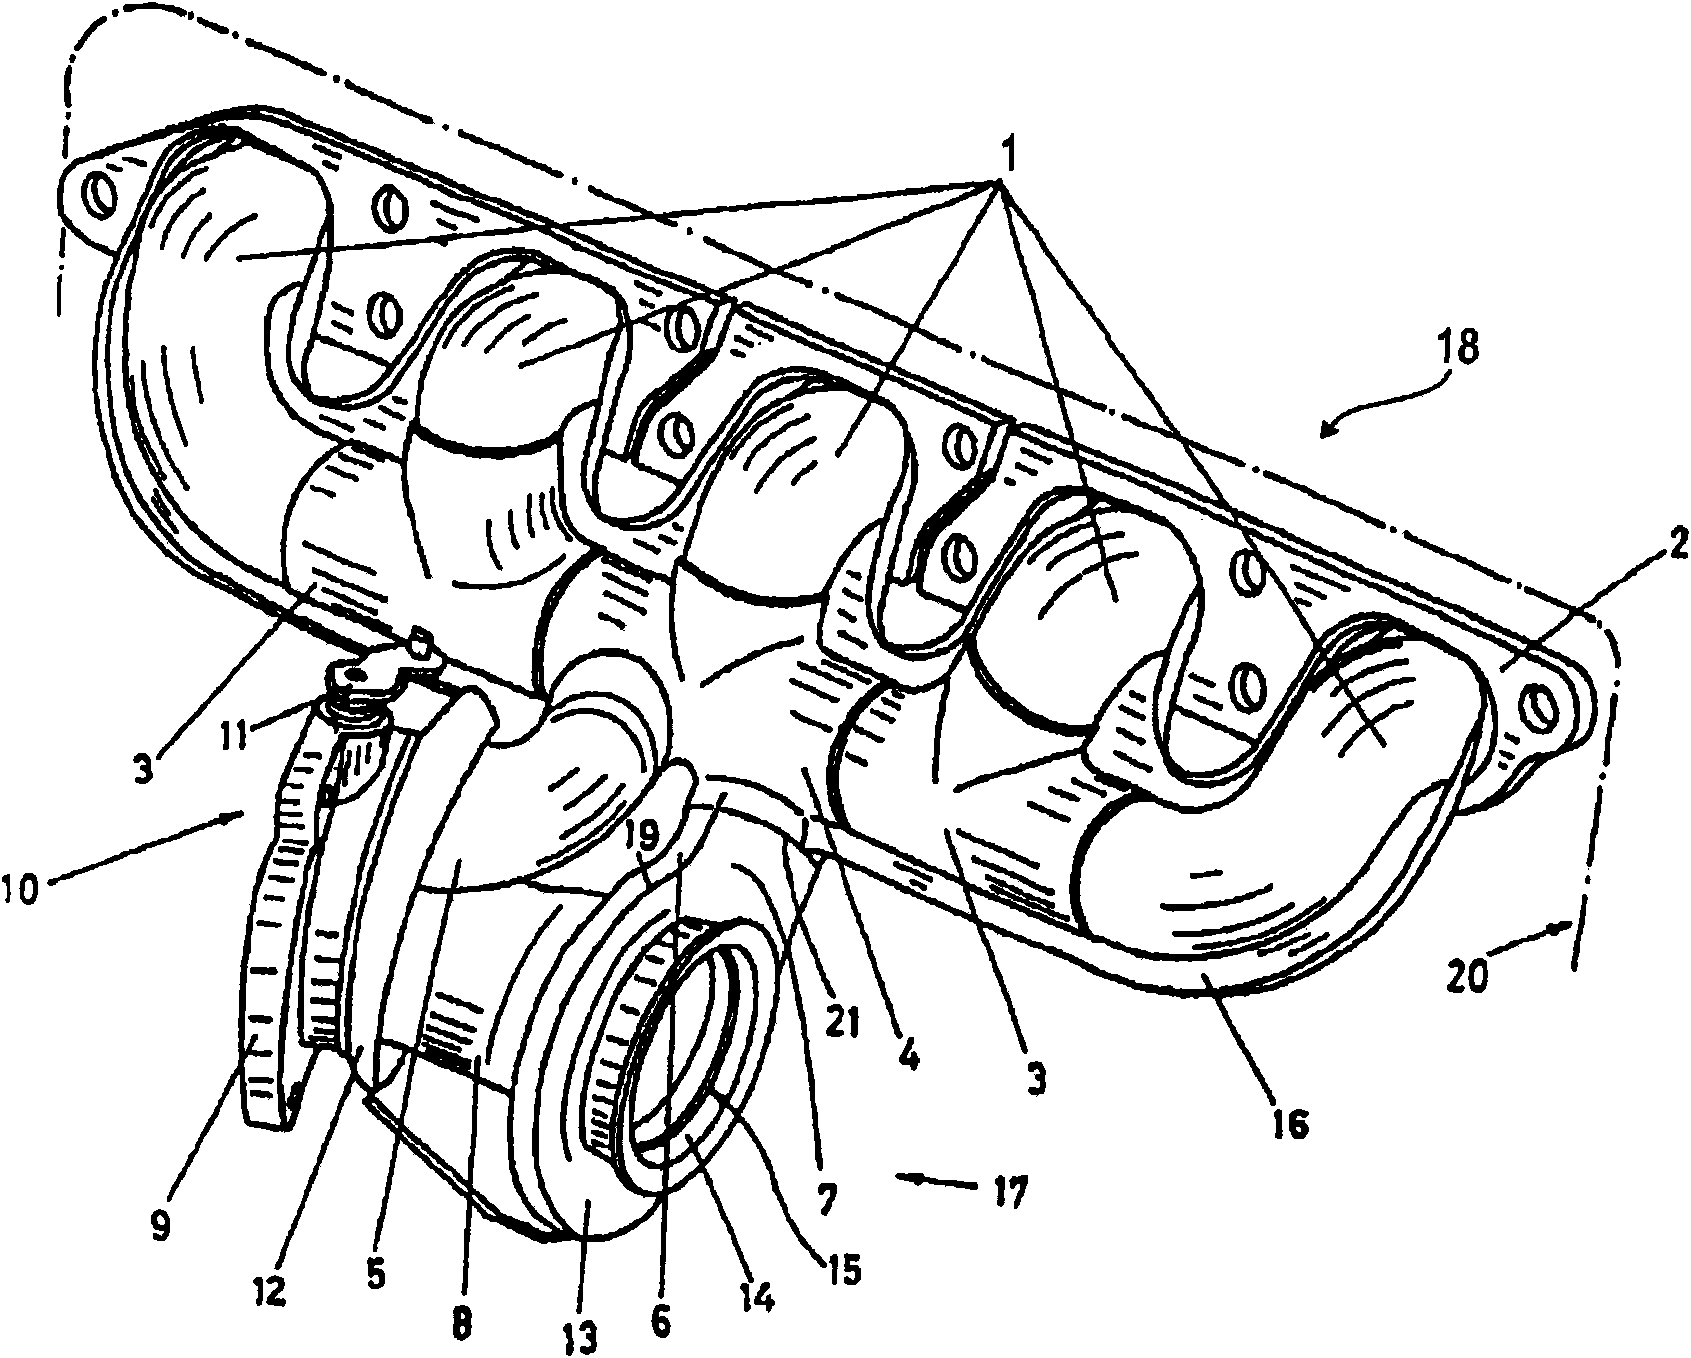 Exhaust manifold of an internal combustion engine